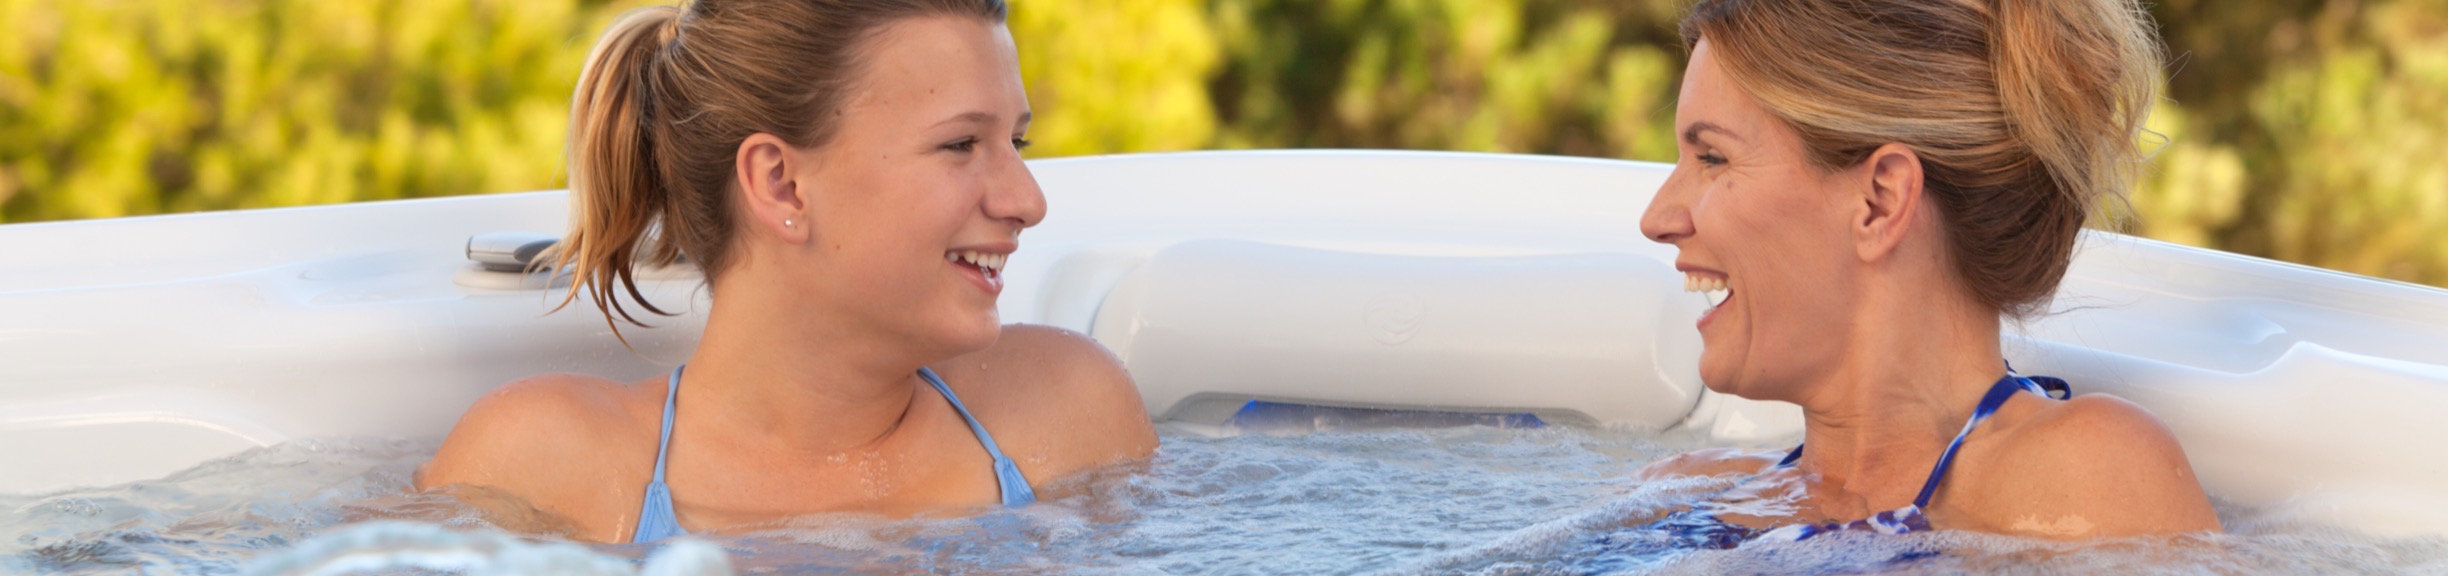 How a Hot Tub Can Help With Stress Management For Teens